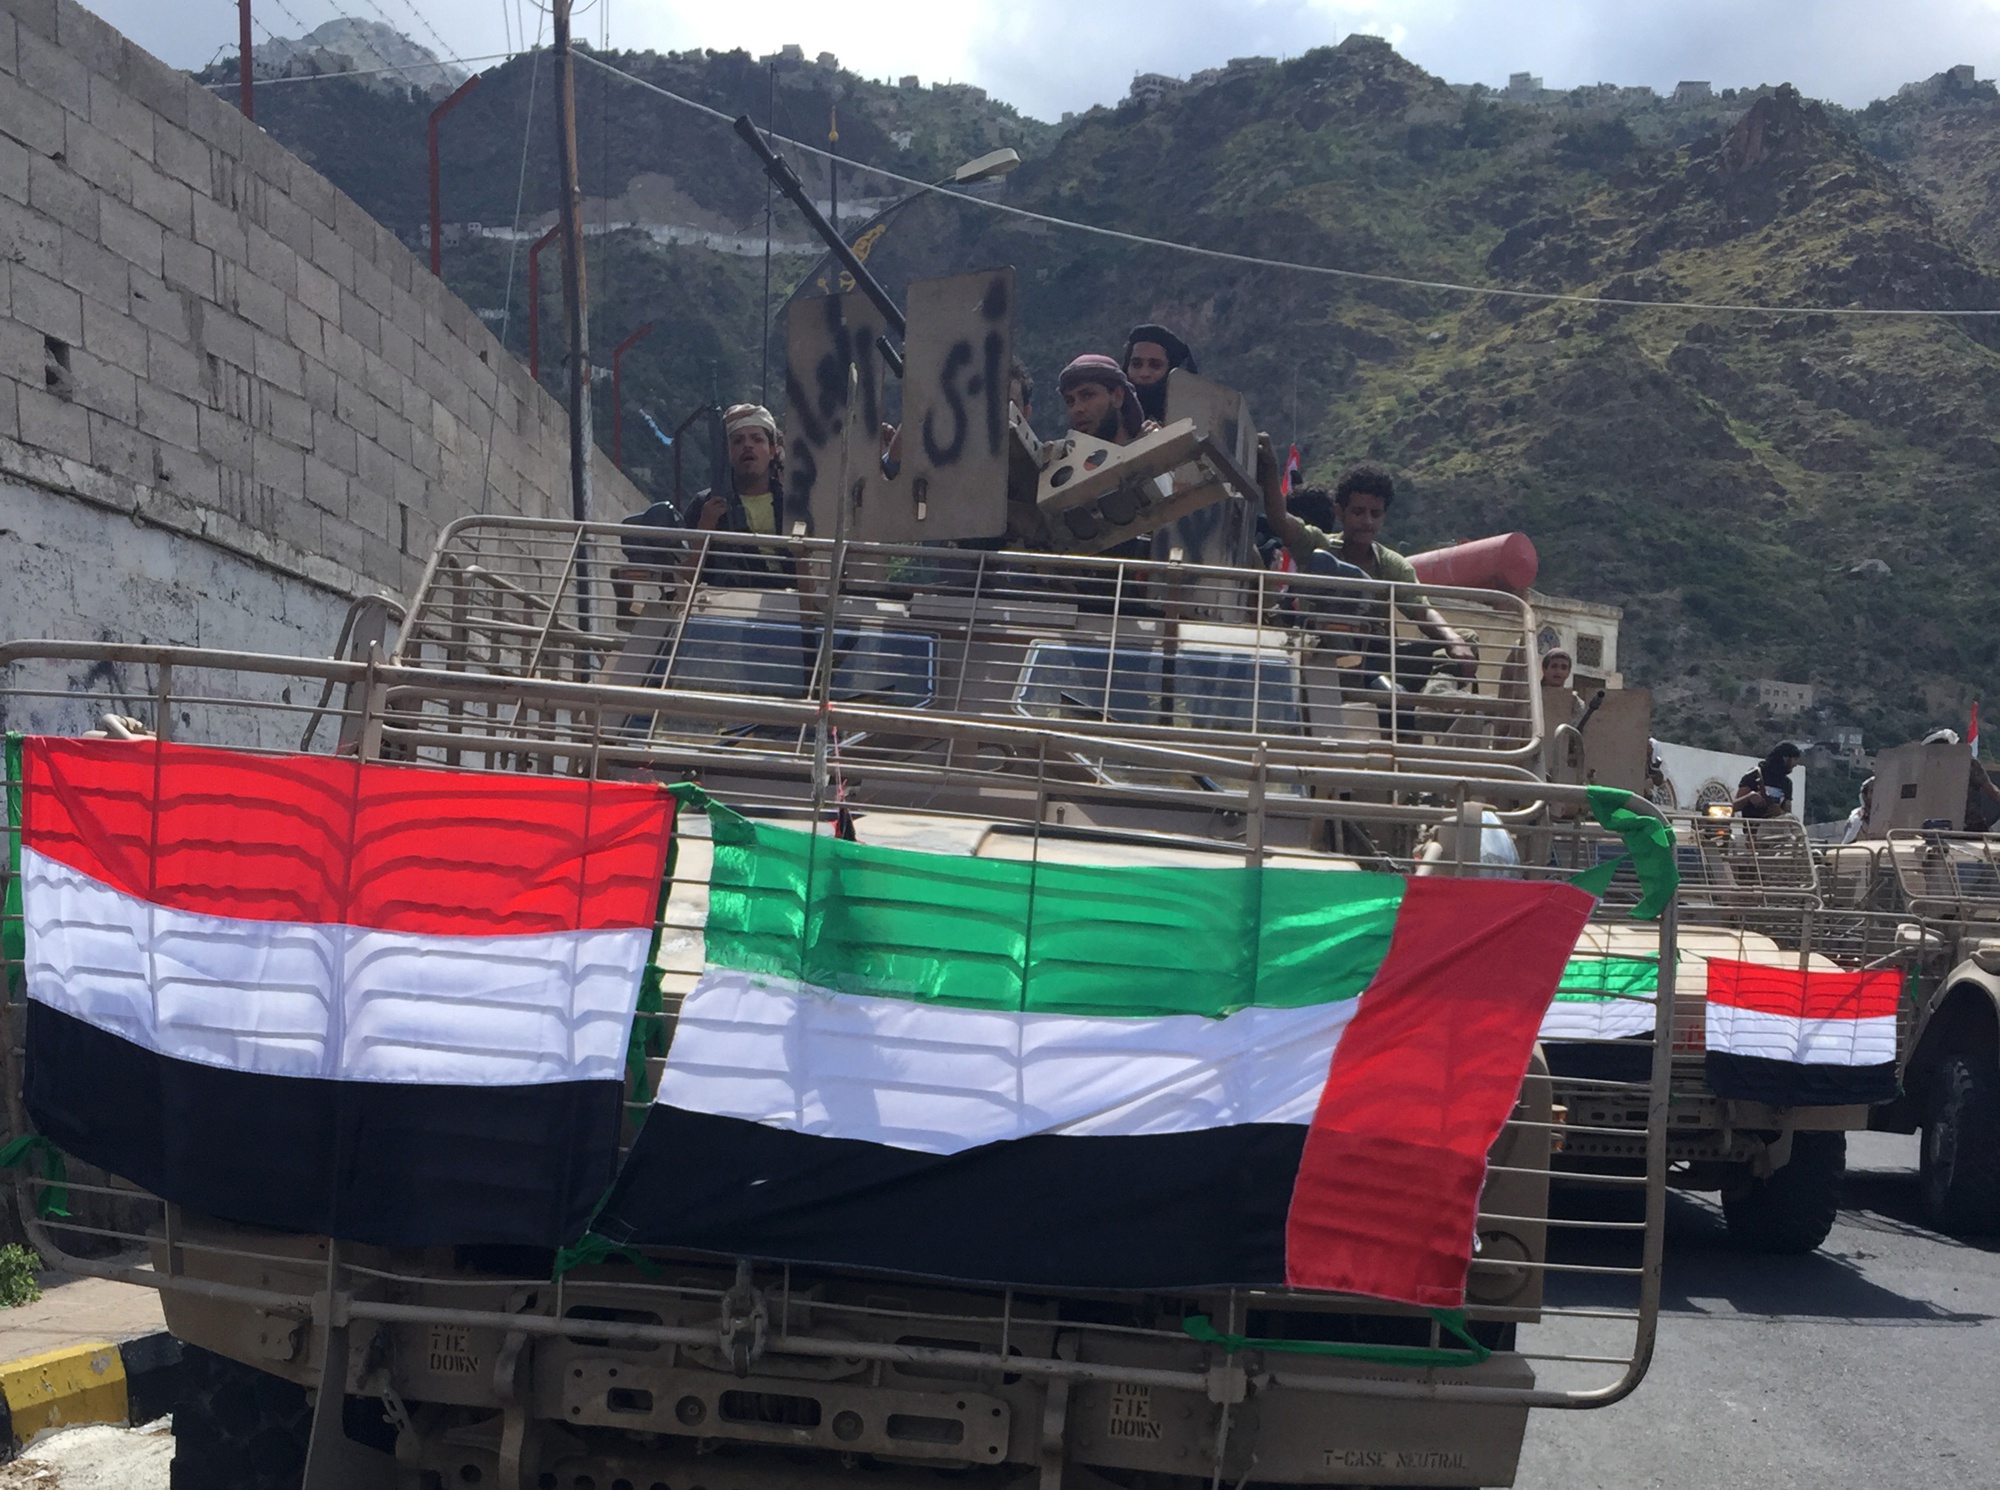 Abu Al-Abbass men celebrate the arrival of three armored vehicles presented by the U.A.E to the city of Taiz in 2015.